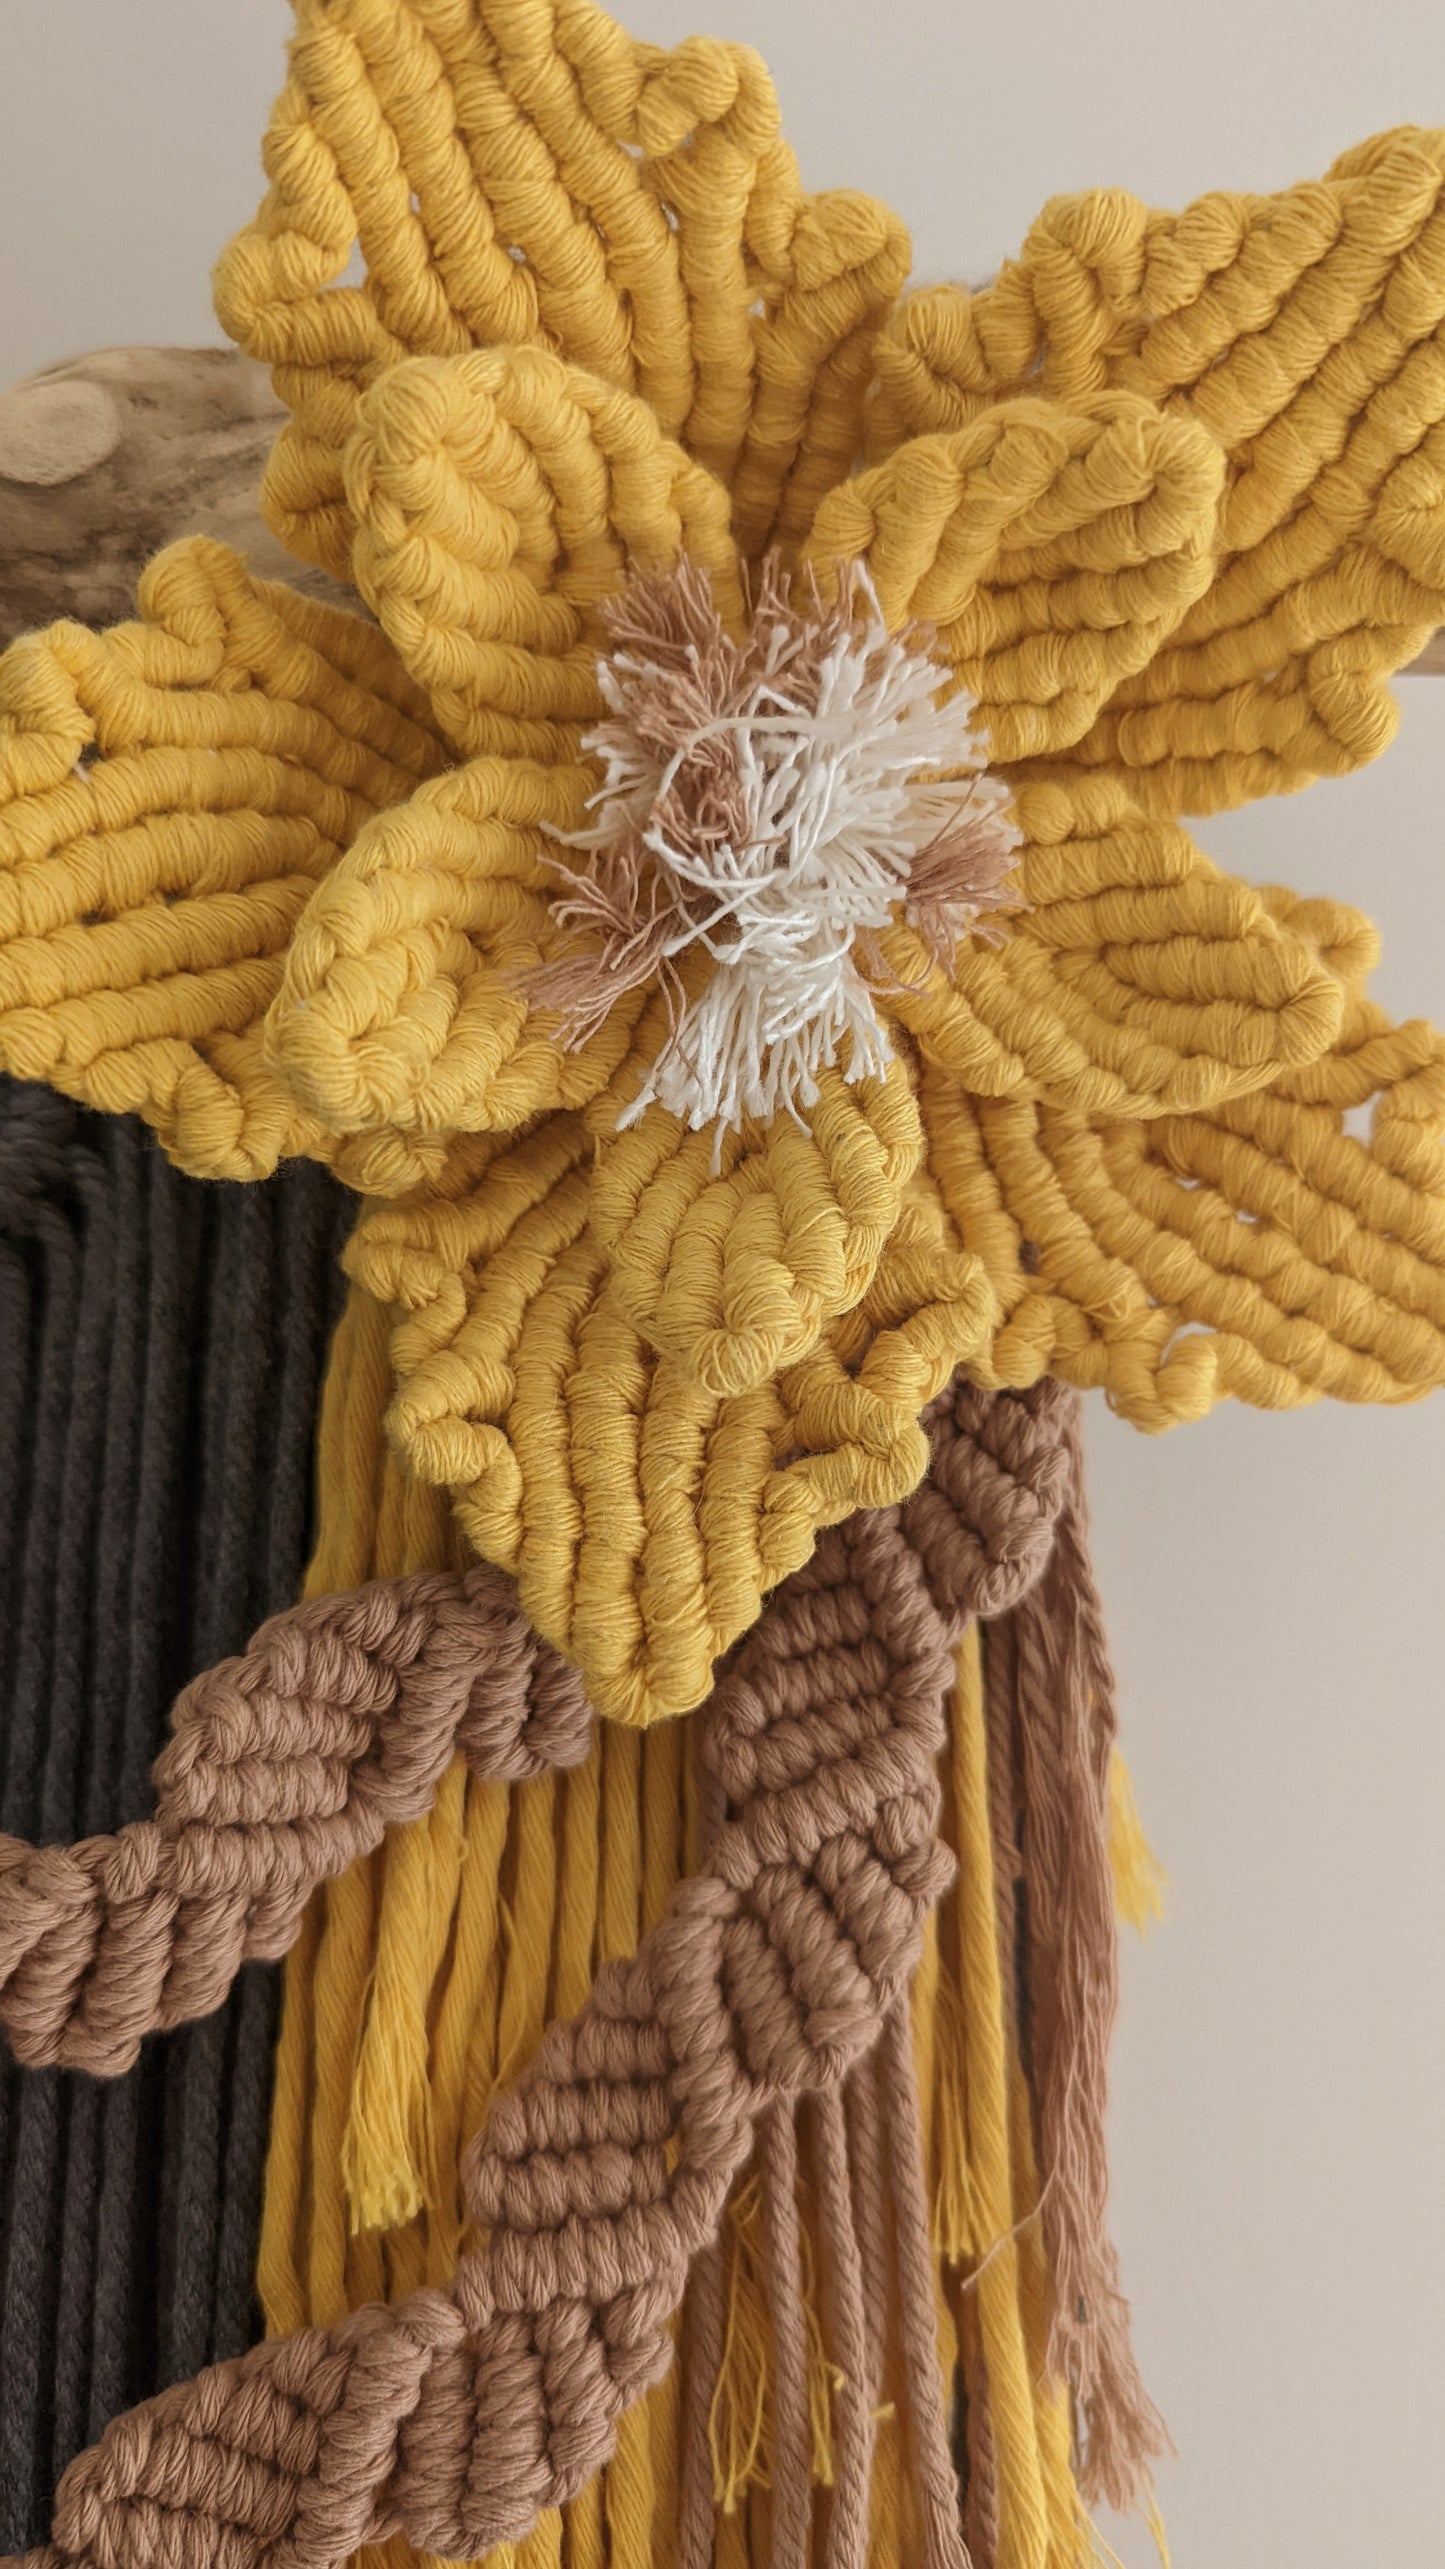 "Colors Of The Fall" Large Macrame Wall Hanging Decor